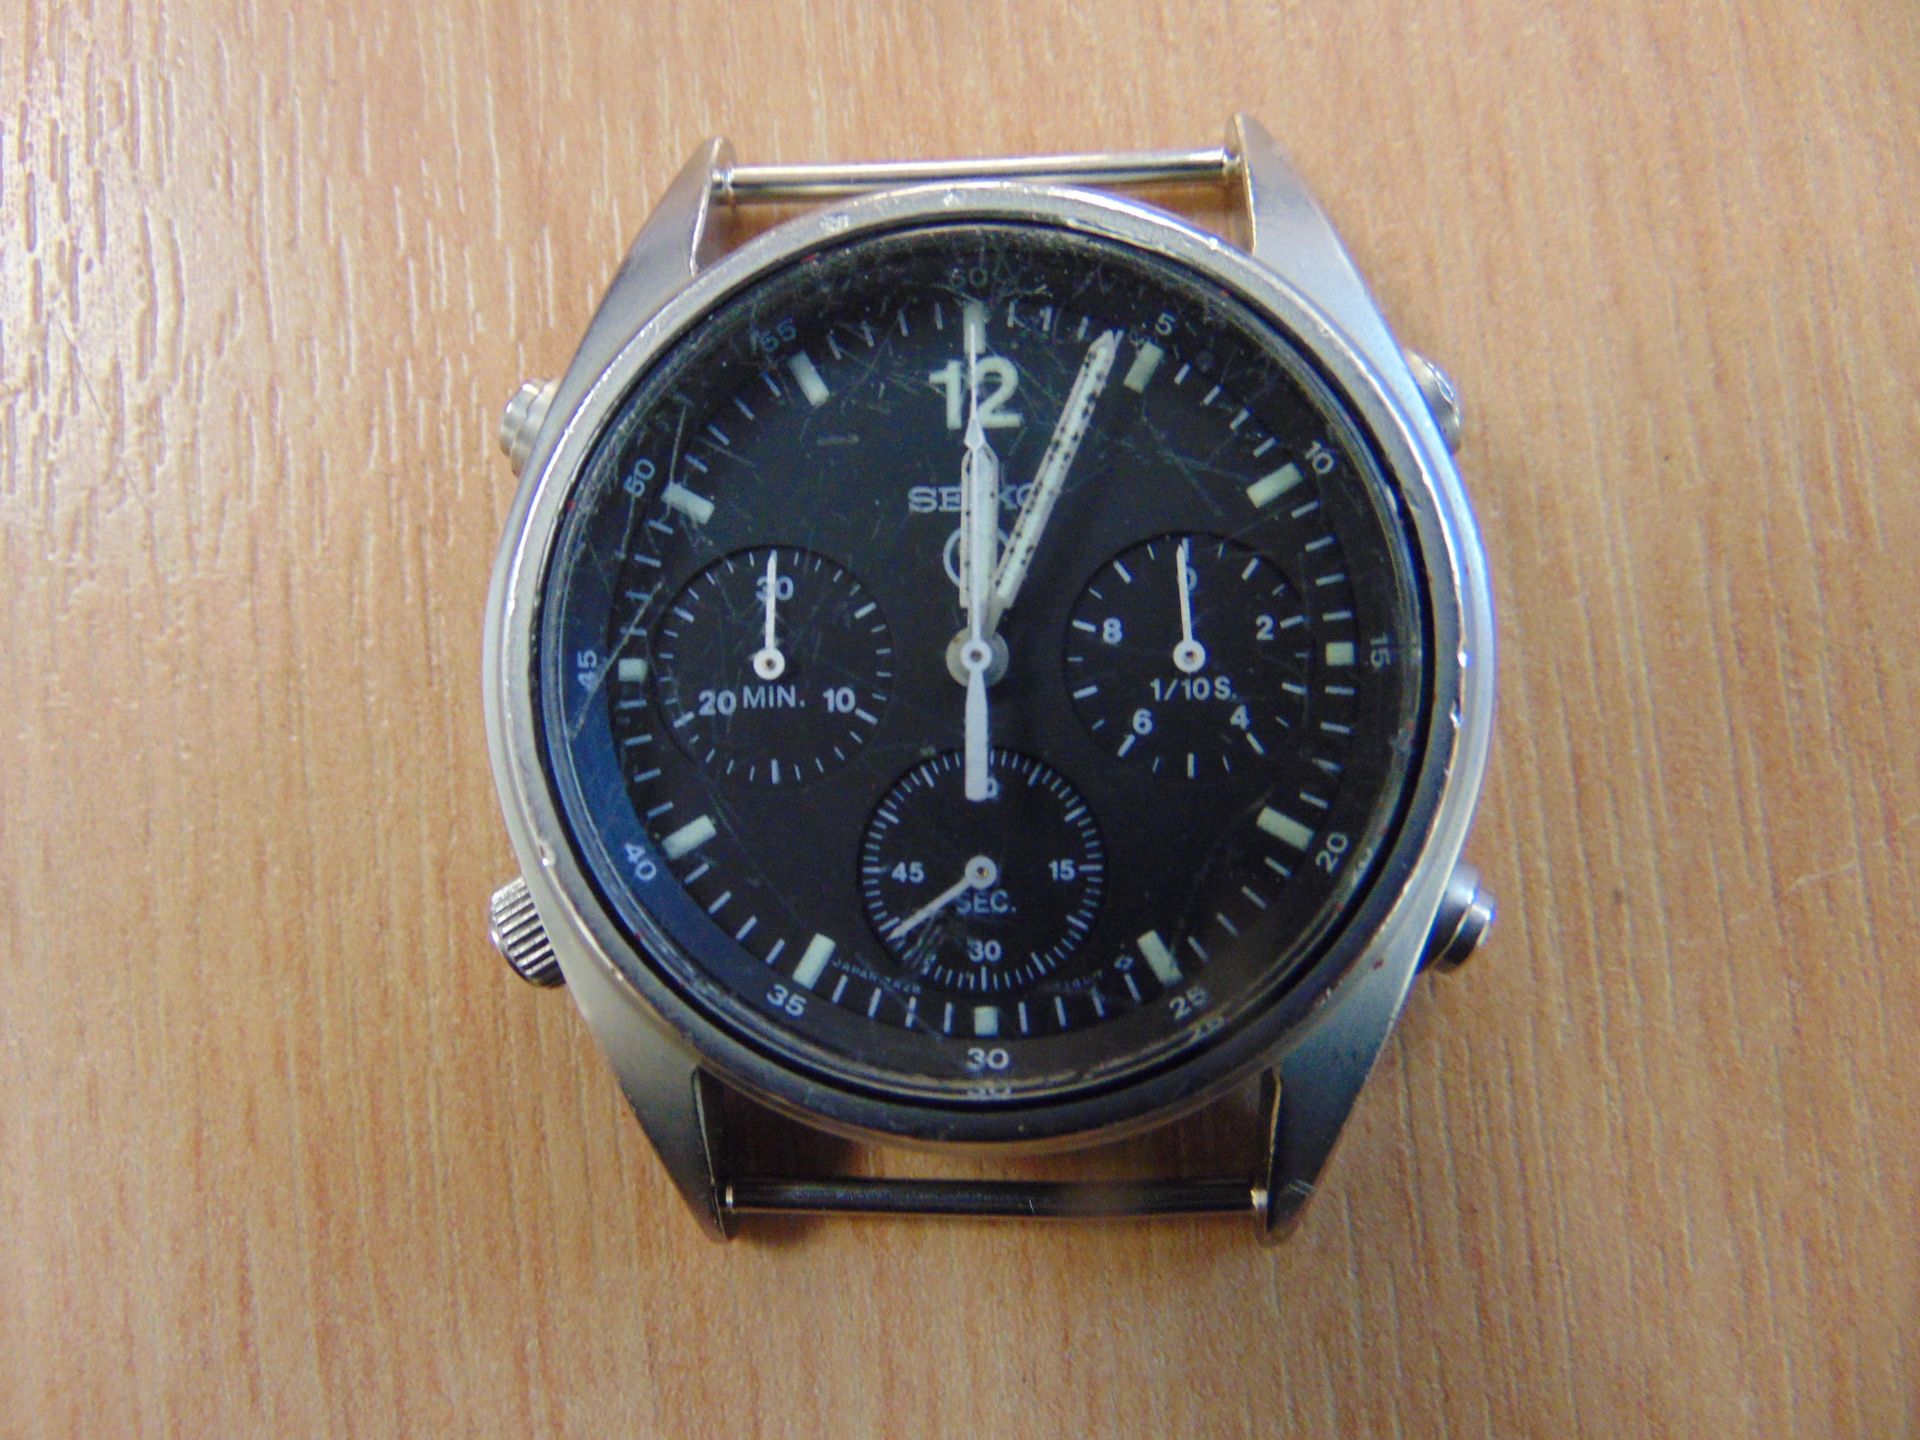 SEIKO GEN 1 PILOTS CHRONO RAF ISSUE Watch NATO MARKINGS DATED 1990 - Image 4 of 10